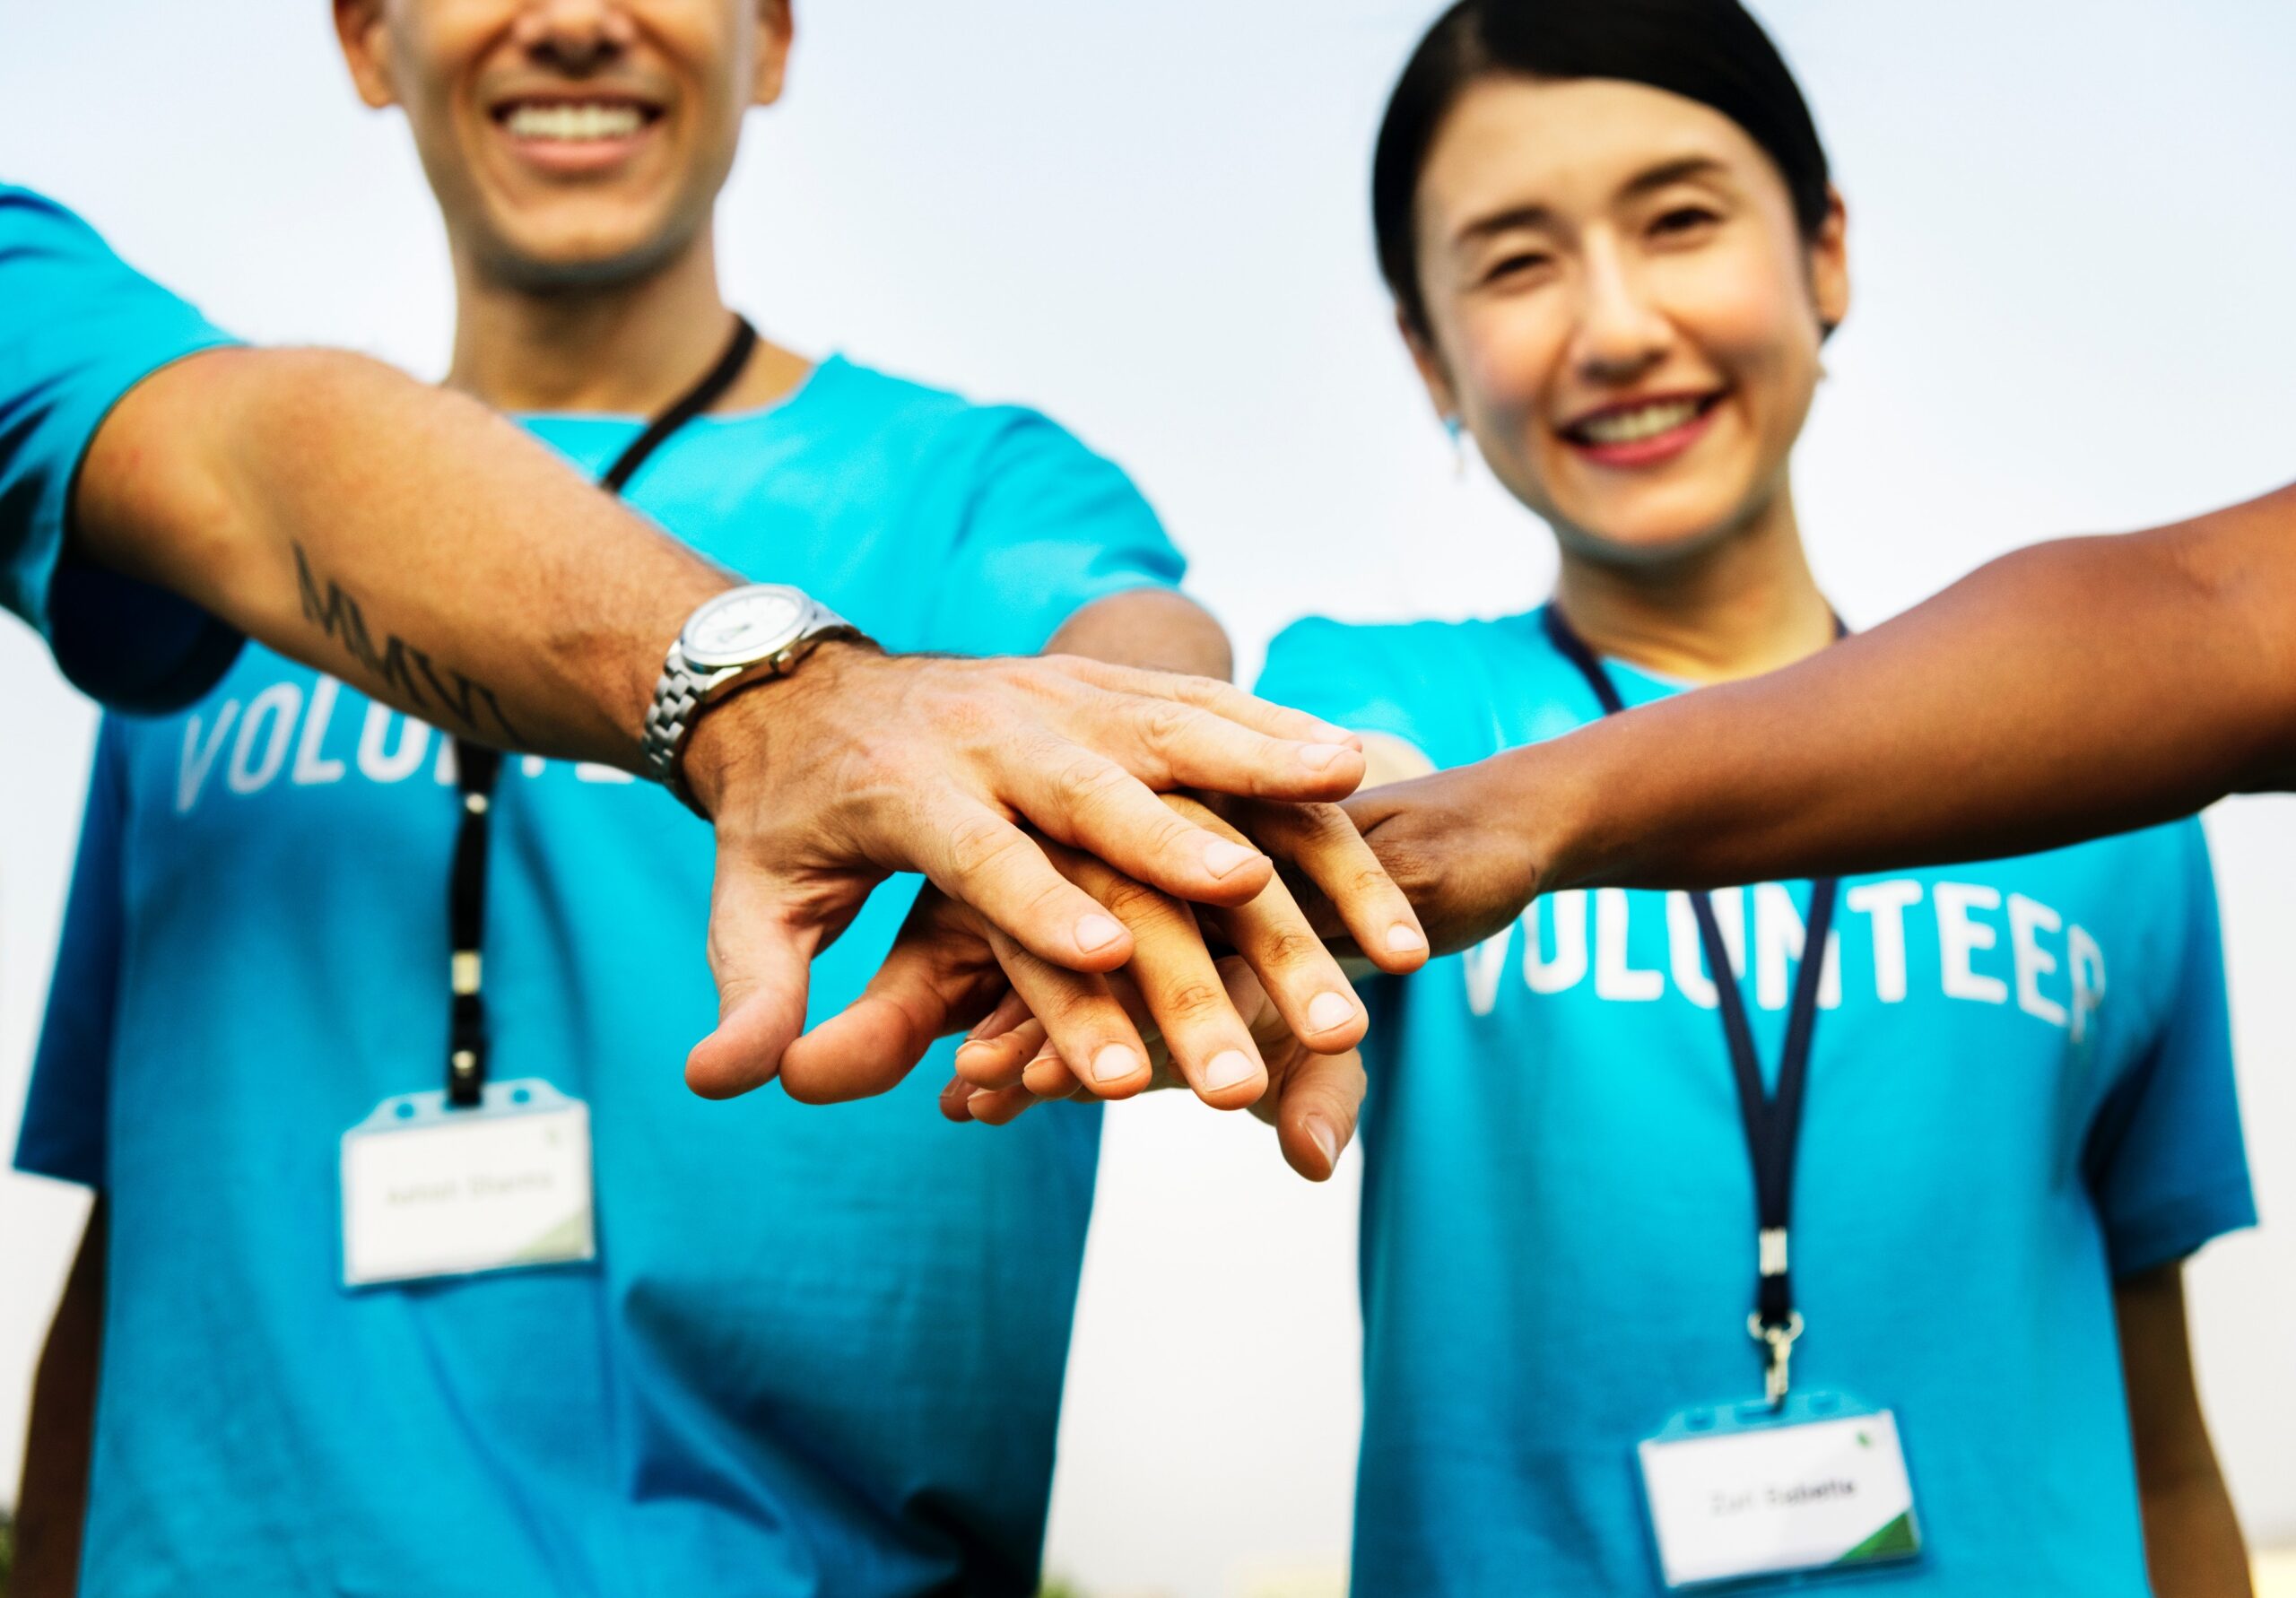 Practice These Steps For Your Next Volunteer Recruitment 